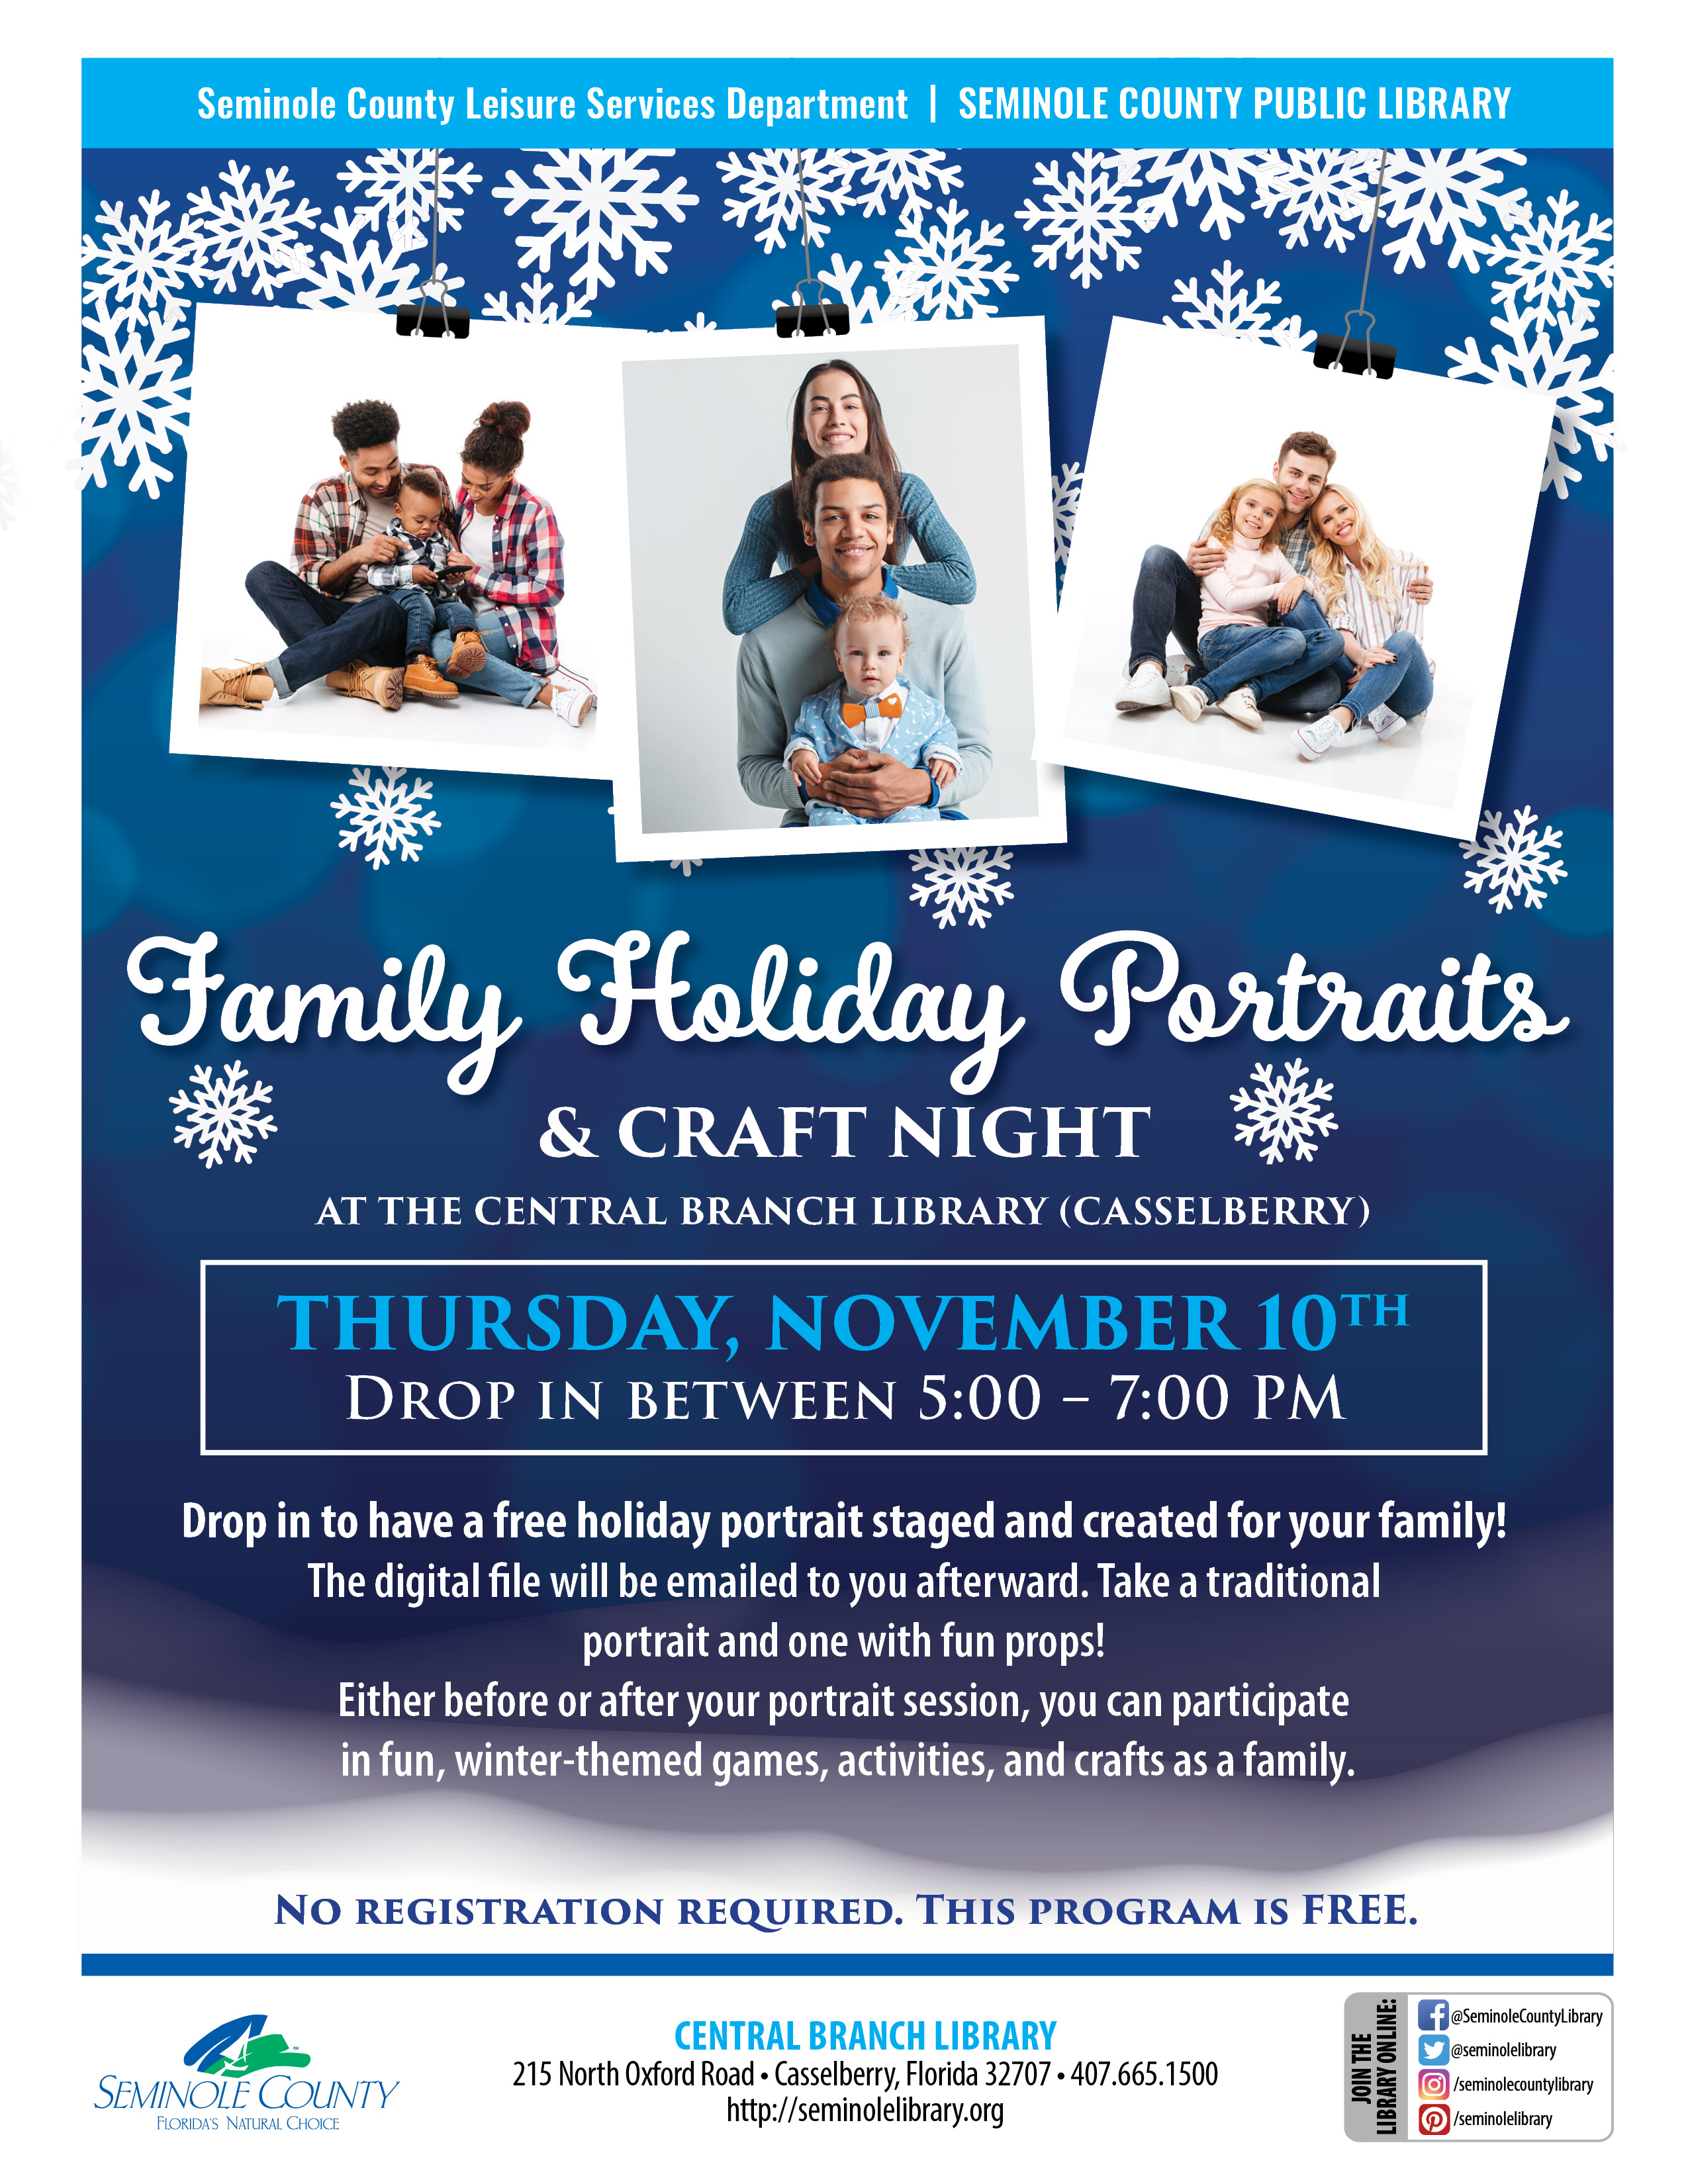 Family Holiday Portraits and Craft Night at Central Branch Library